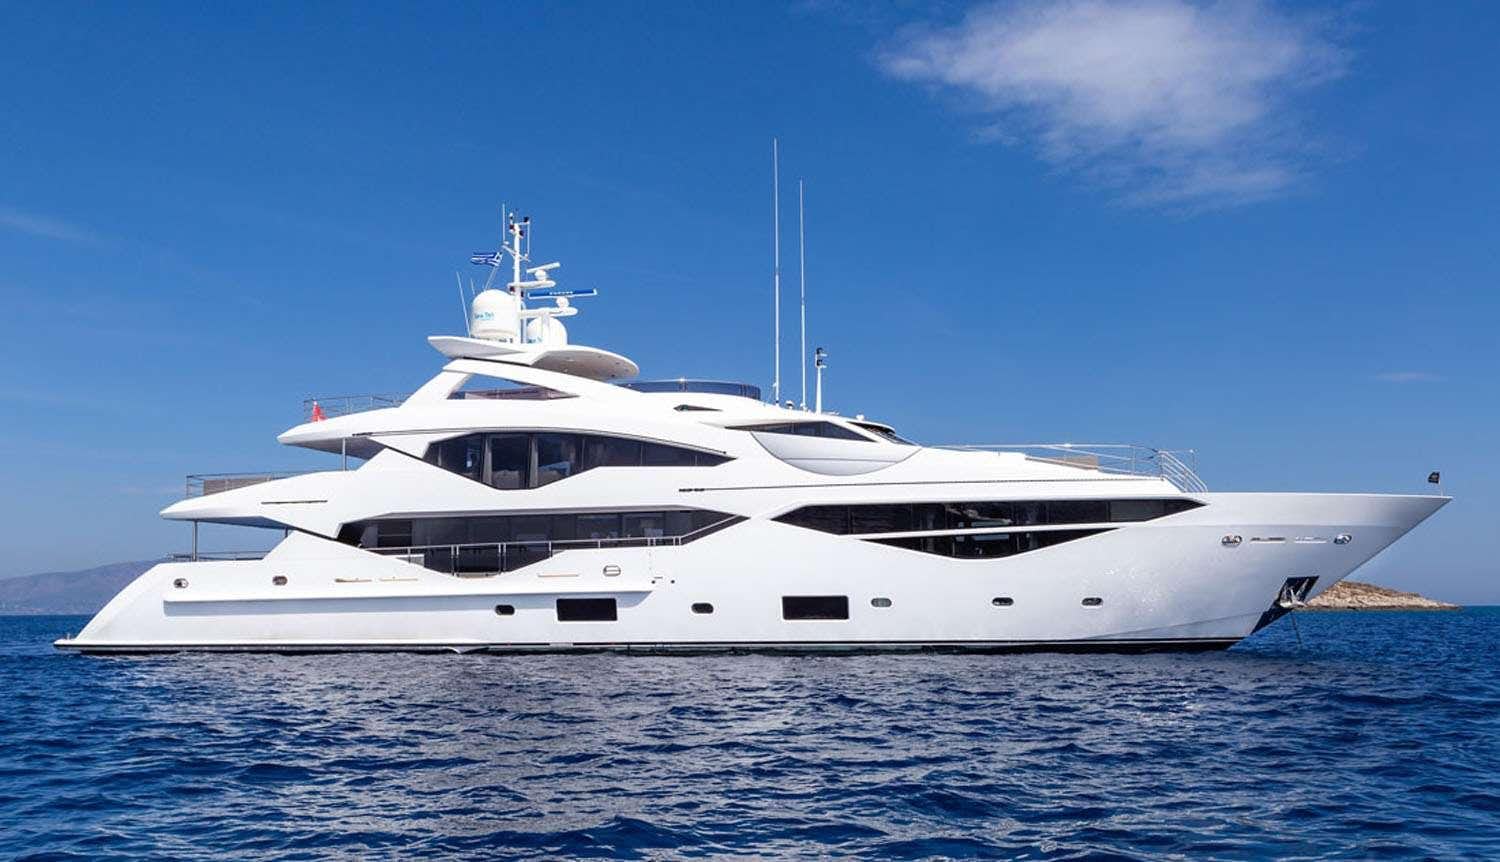 Watch Video for AQUA LIBRA Yacht for Charter